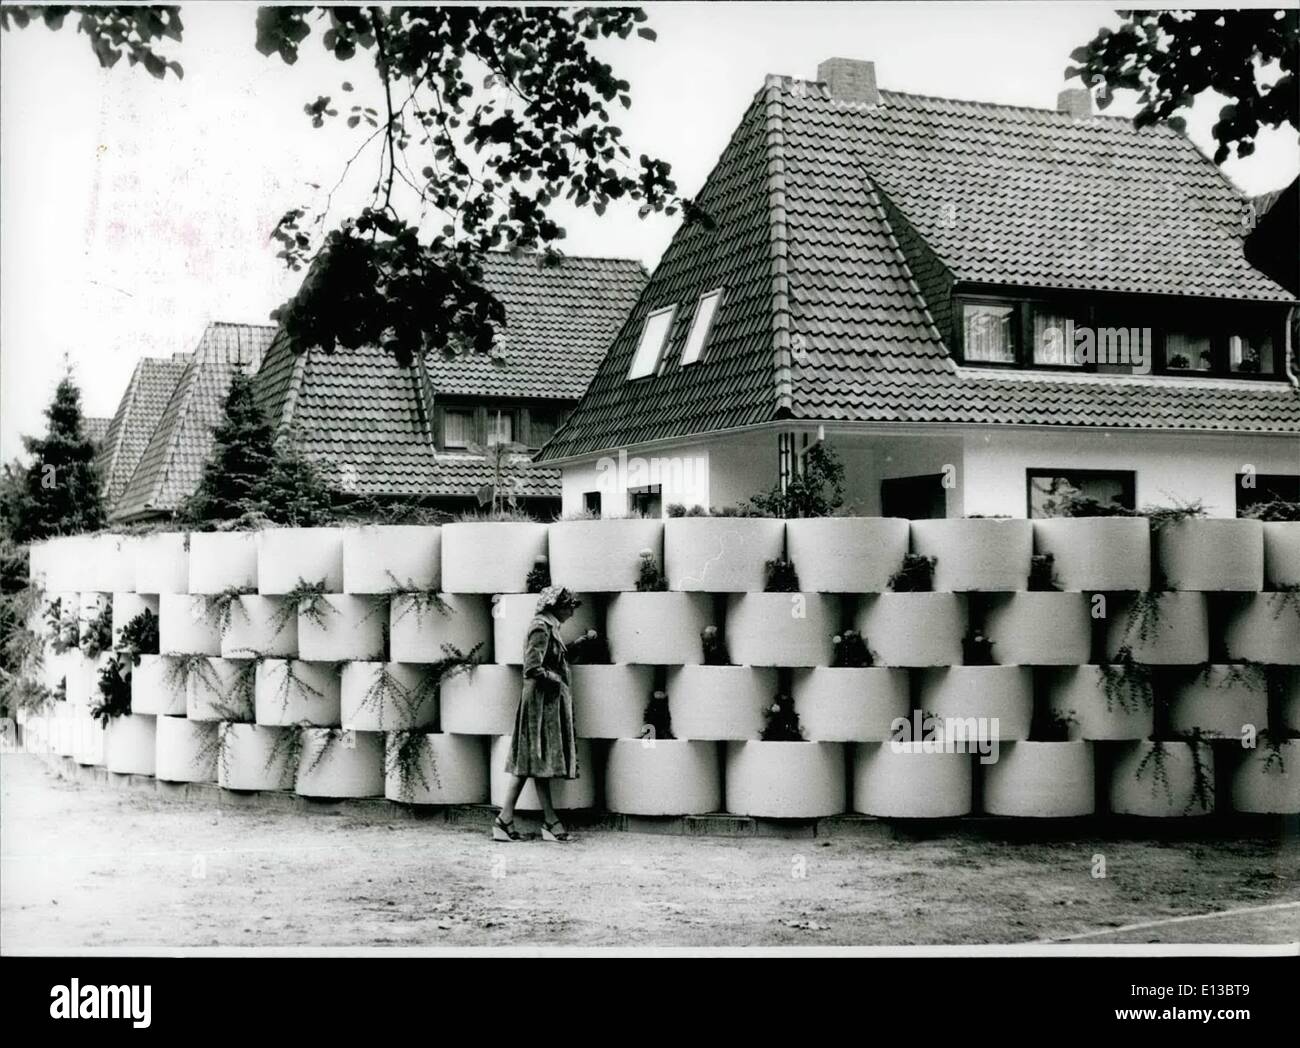 Feb. 29, 2012 - THE USEFUL CONNECT WITH THE PLEASANT.... ...did a neighbour of a strong frequented highway in Bremen-Babenhauseben/West-Germany. In his sleepless nights, caused by the traffic-noise, he had the idea to combine a sound-absorbing wall with an embellishing effect: Round pots made of concrete, painted in white and filled with mould got planted with flowers. Now it isn't only nice, also the noise from the street is tilt. The sound-absorbing wall is as nice that official offices had showed their interest in such an efficiency and pretty noice-protecting. Stock Photo